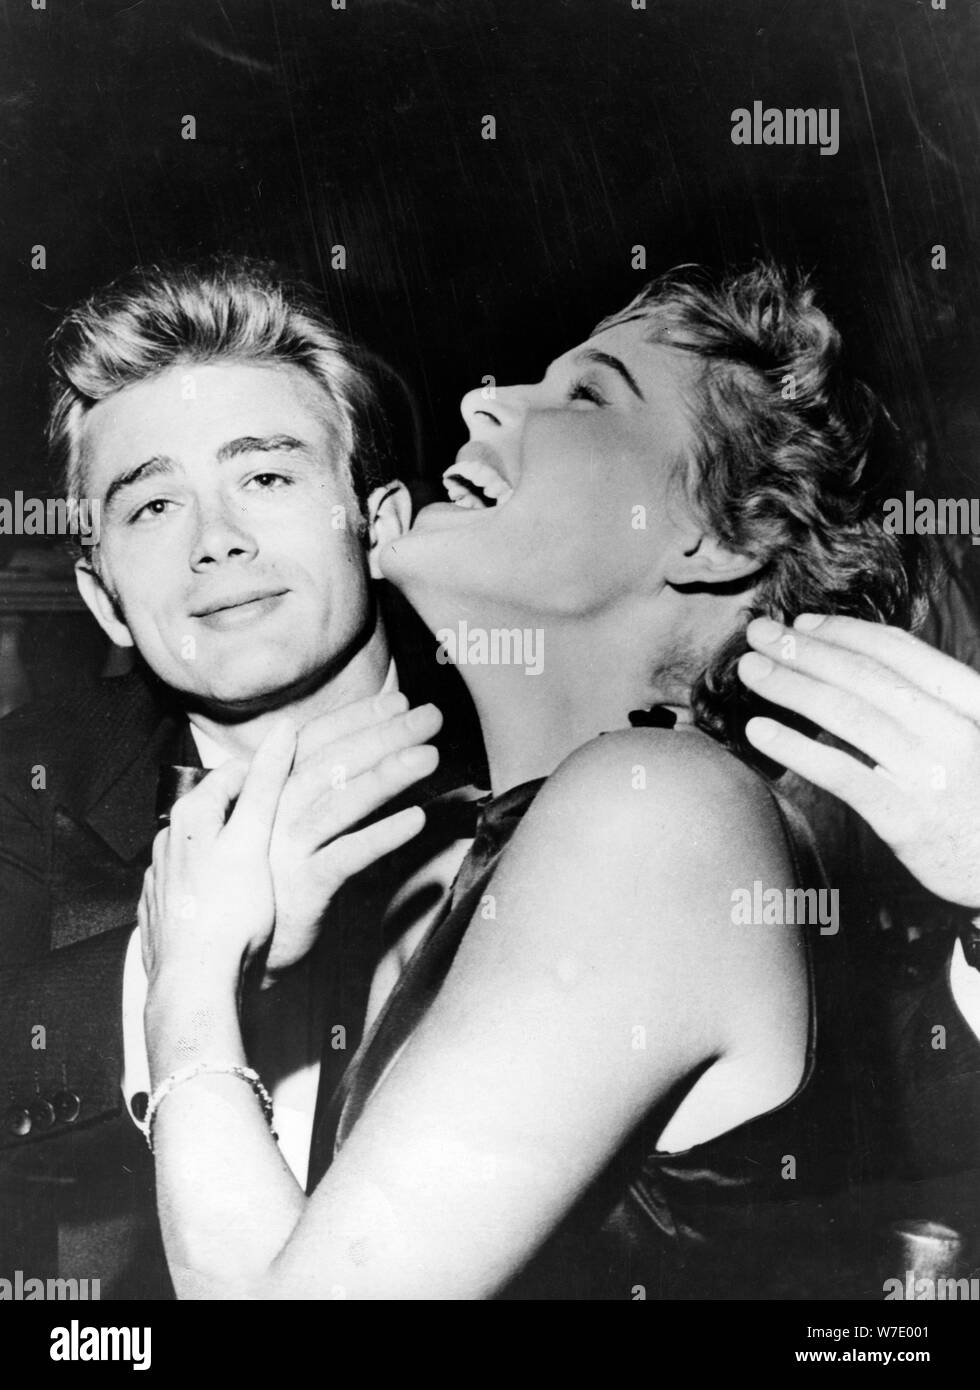 Actors James Dean And Ursula Andress C1954 C1955 Artist Unknown Stock Photo Alamy